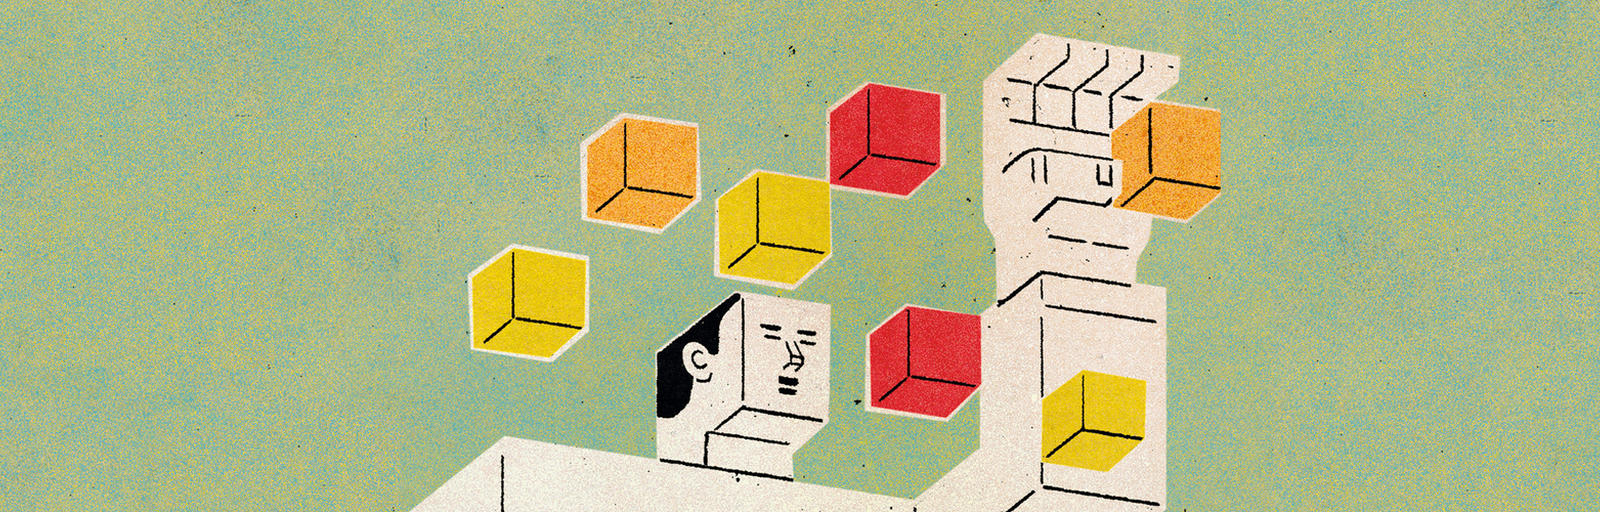 An illustration of a block person collecting cubes